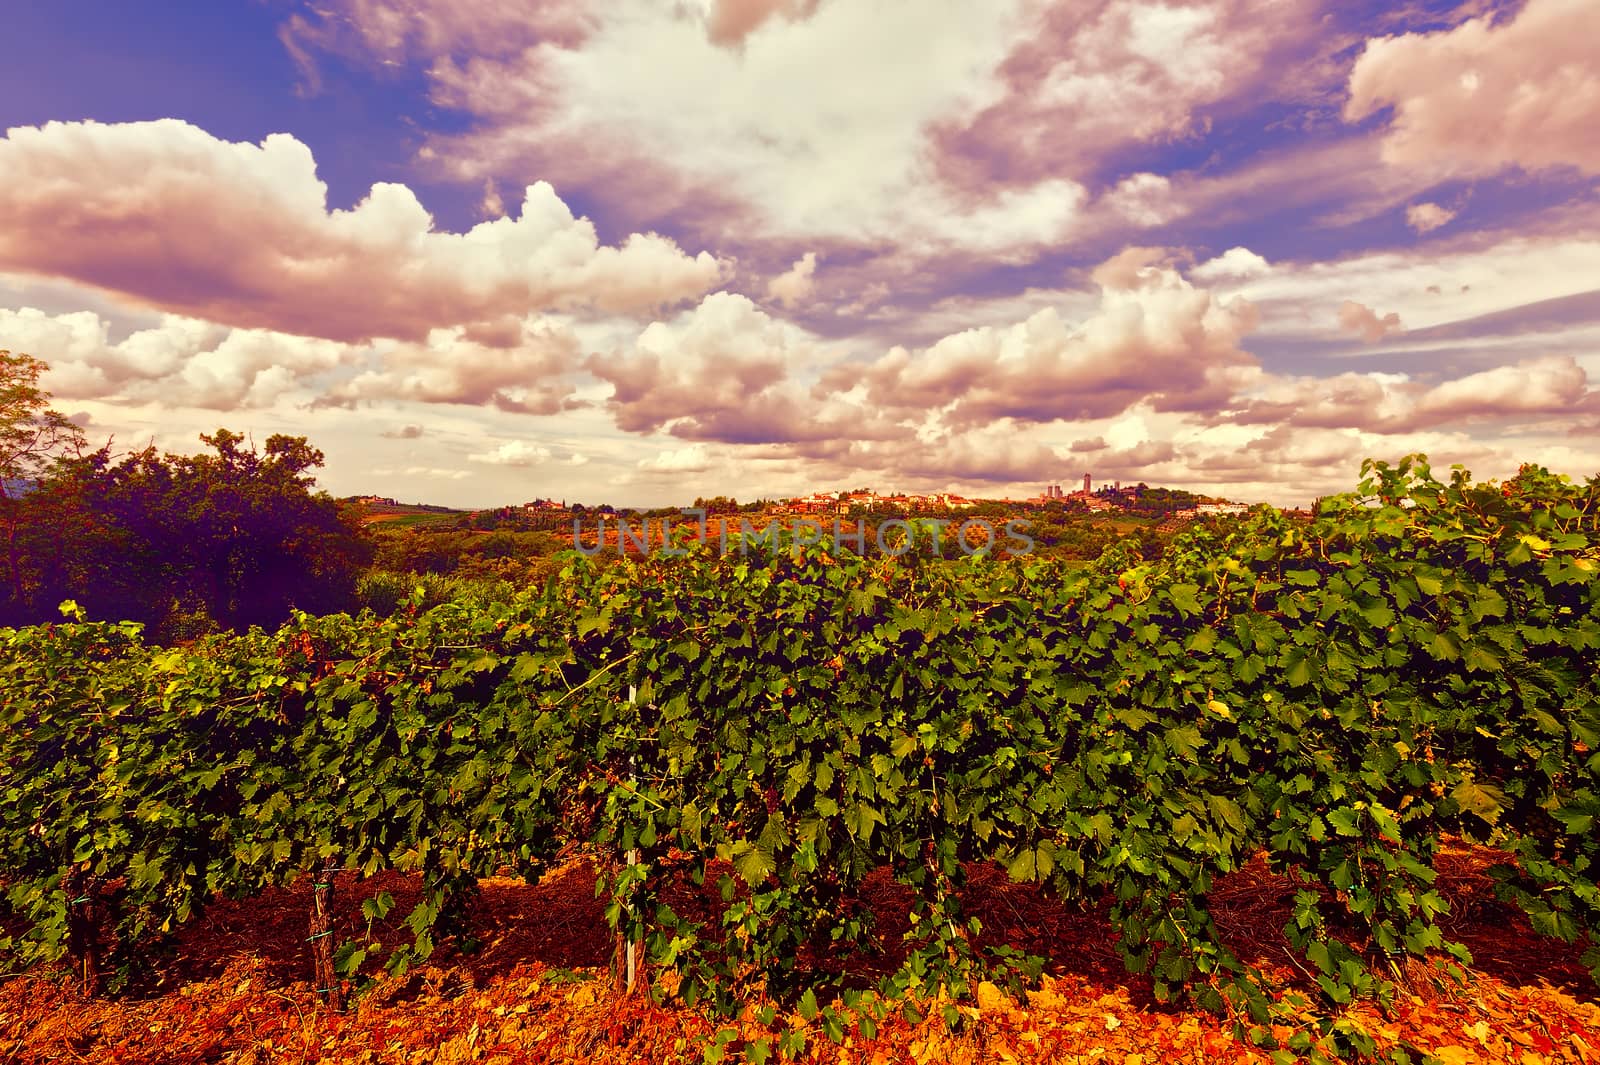 Landscape of Tuscany with Vineyard in the Chianti Region at Sunset, Vintage Style Toned Picture